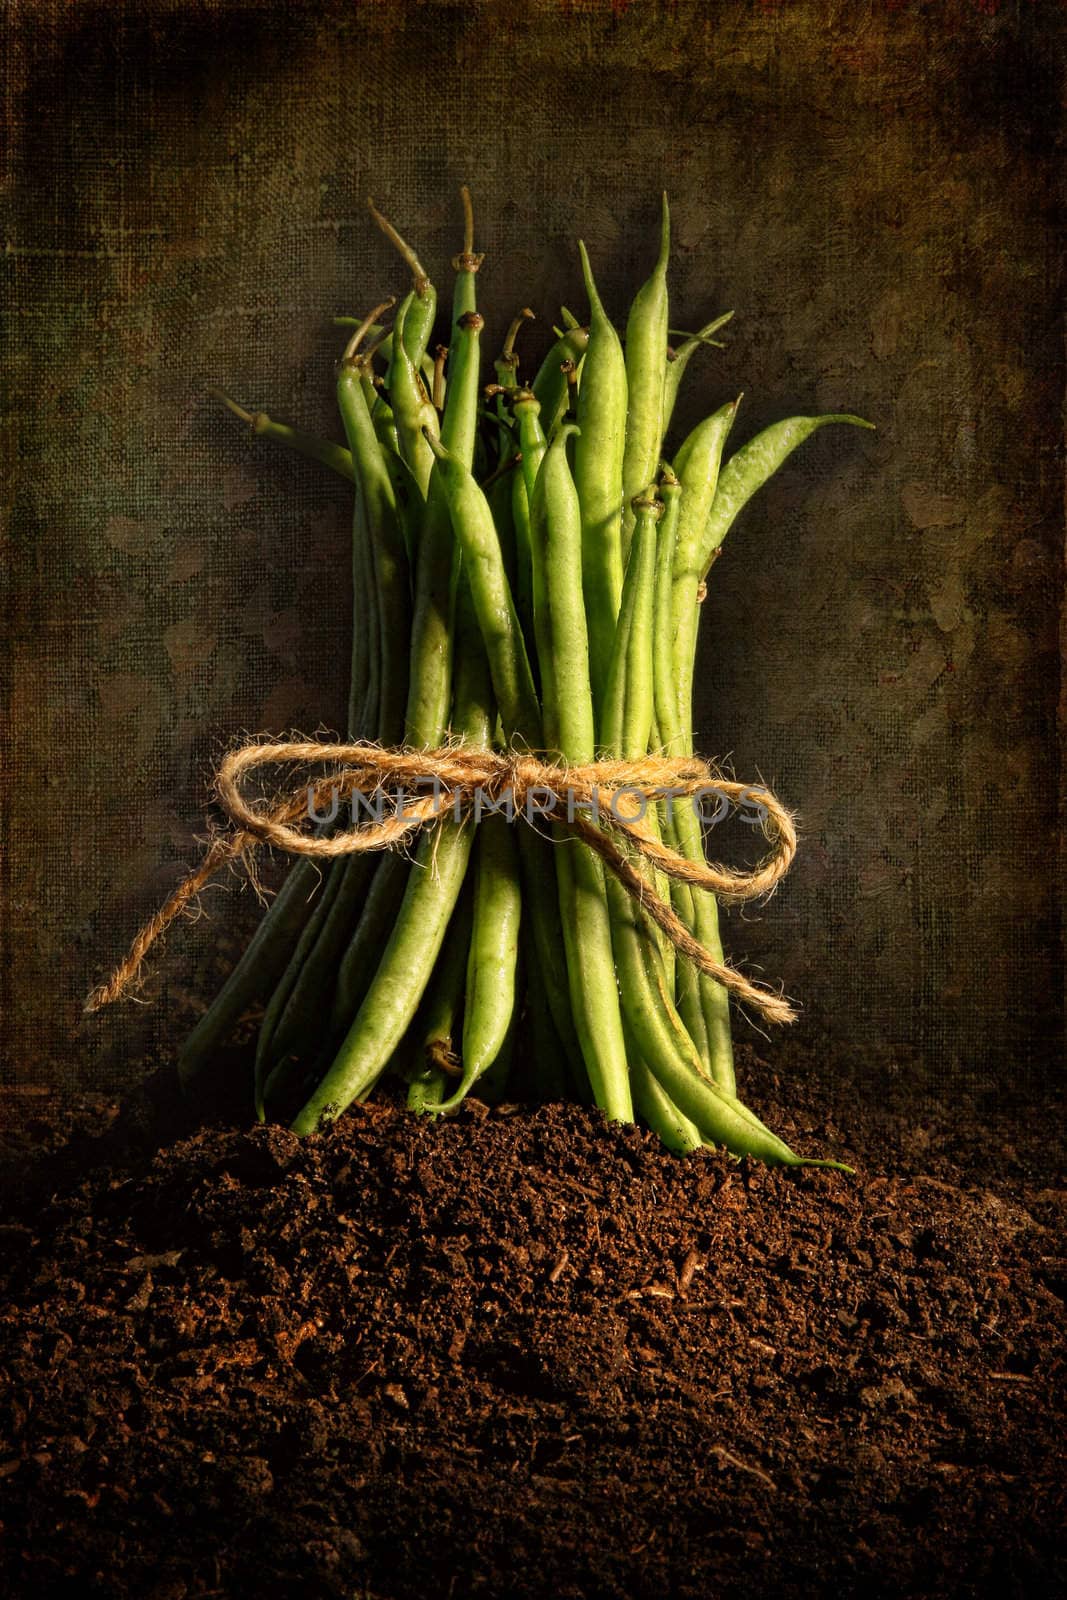 Fresh green beans tied against grunge background by Sandralise